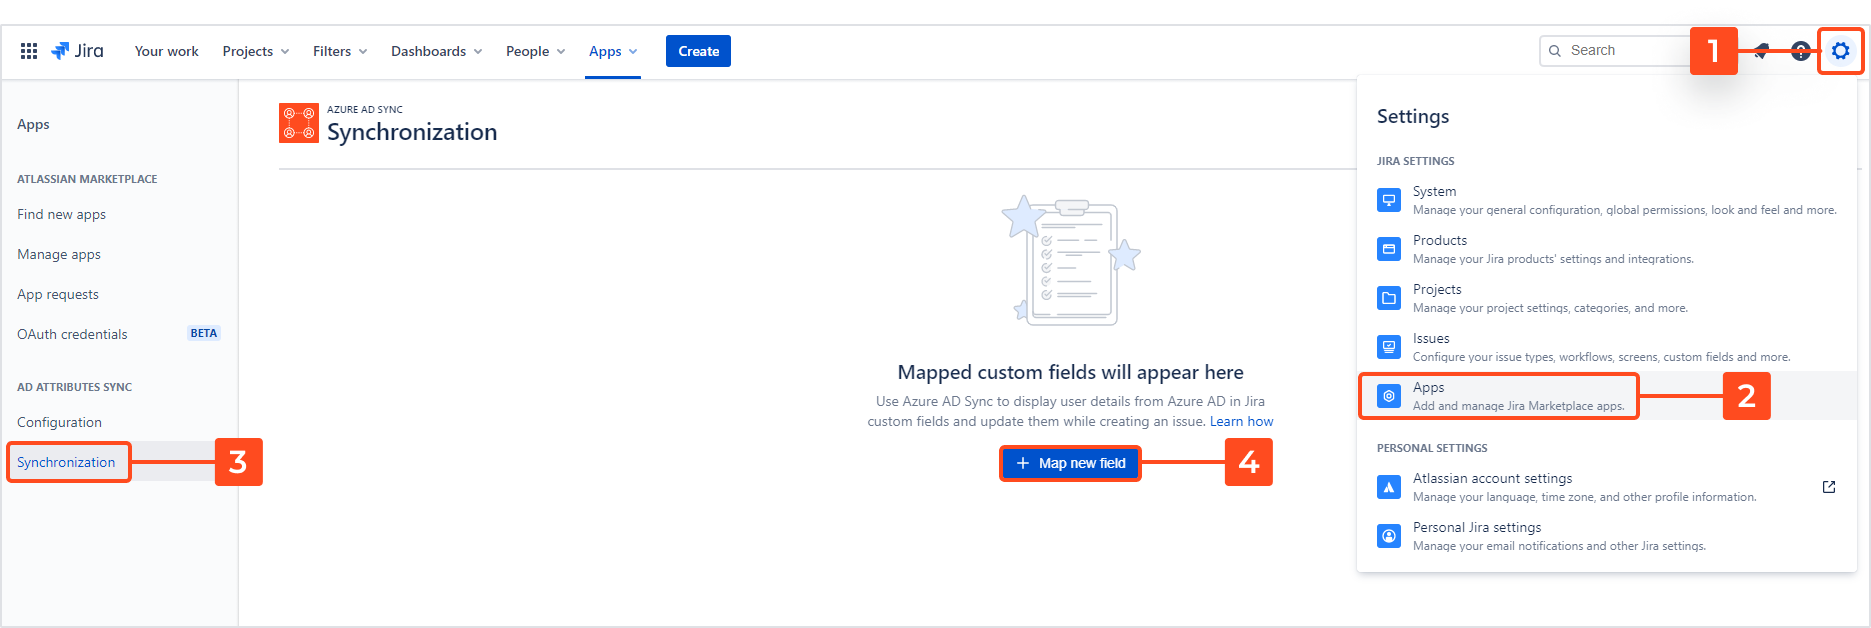 Azure AD Attributes for Jira - Mapping Azure AD data to a custom field